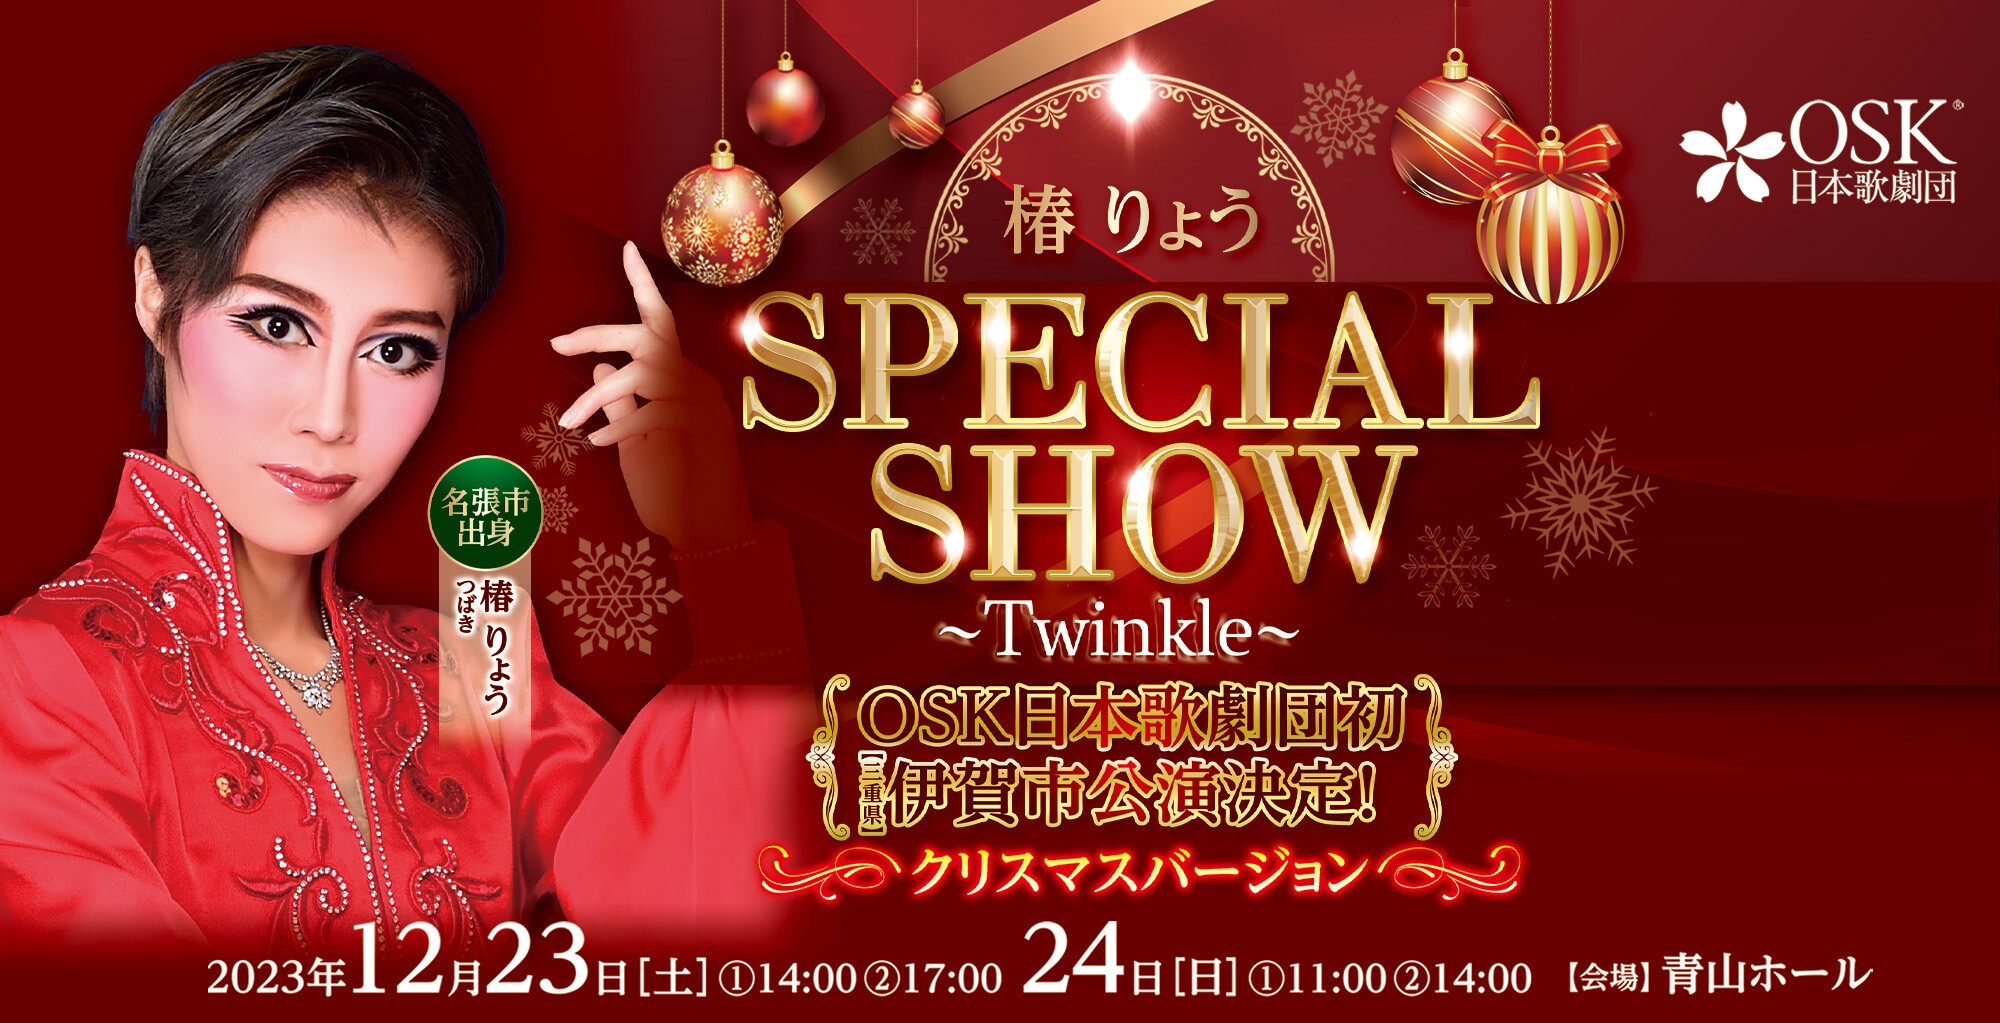 OSK日本歌劇団　SHOW　OSK日本歌劇団】椿りょう　～Twinkle～（2023年12月）　SPECIAL　Tickets